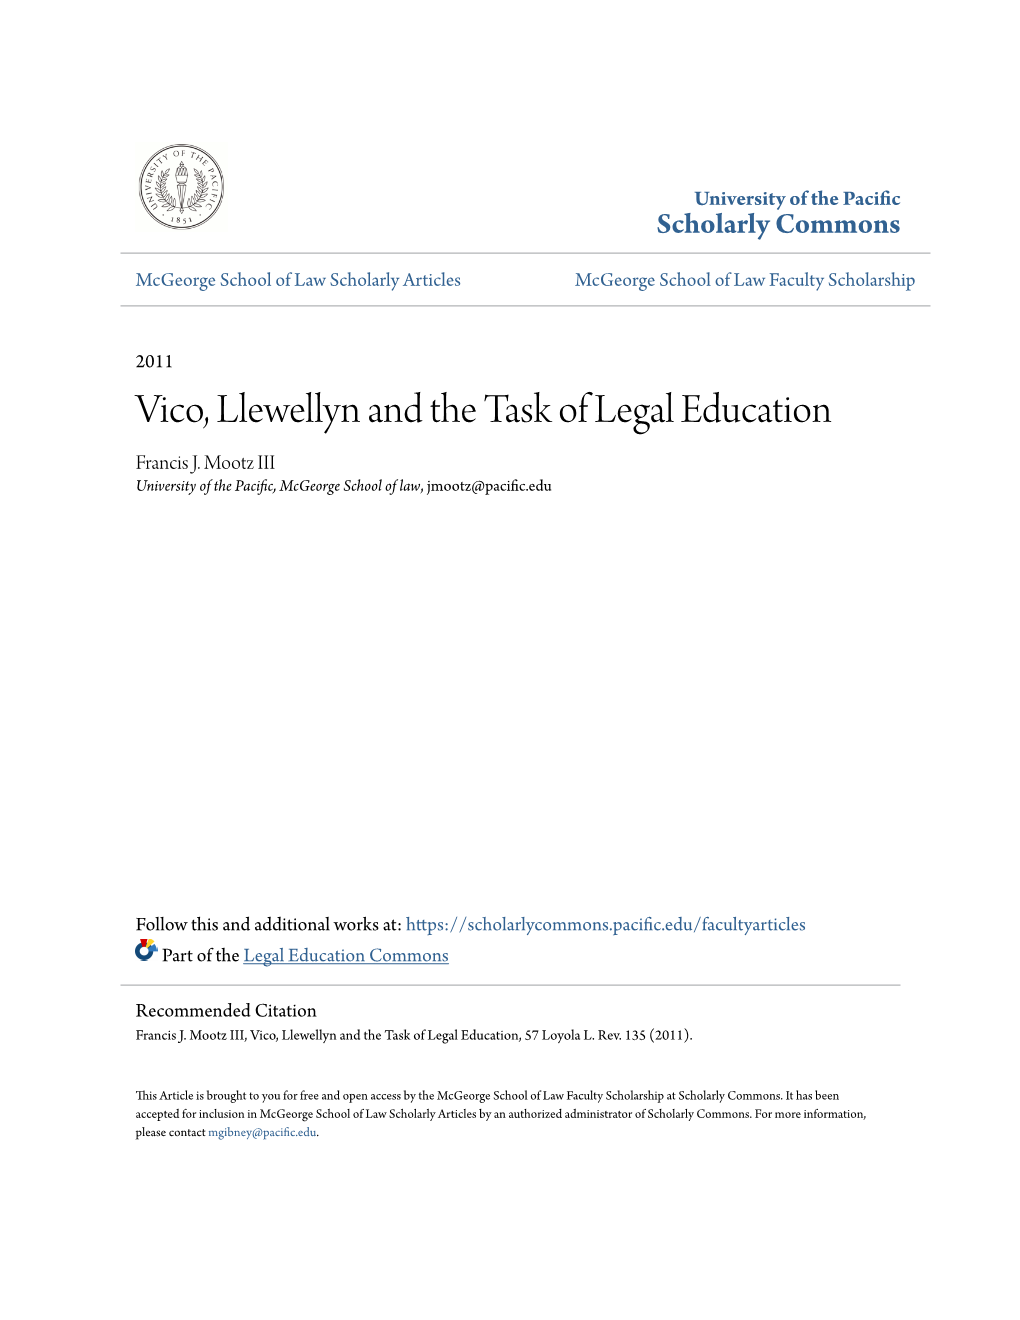 Vico, Llewellyn and the Task of Legal Education Francis J